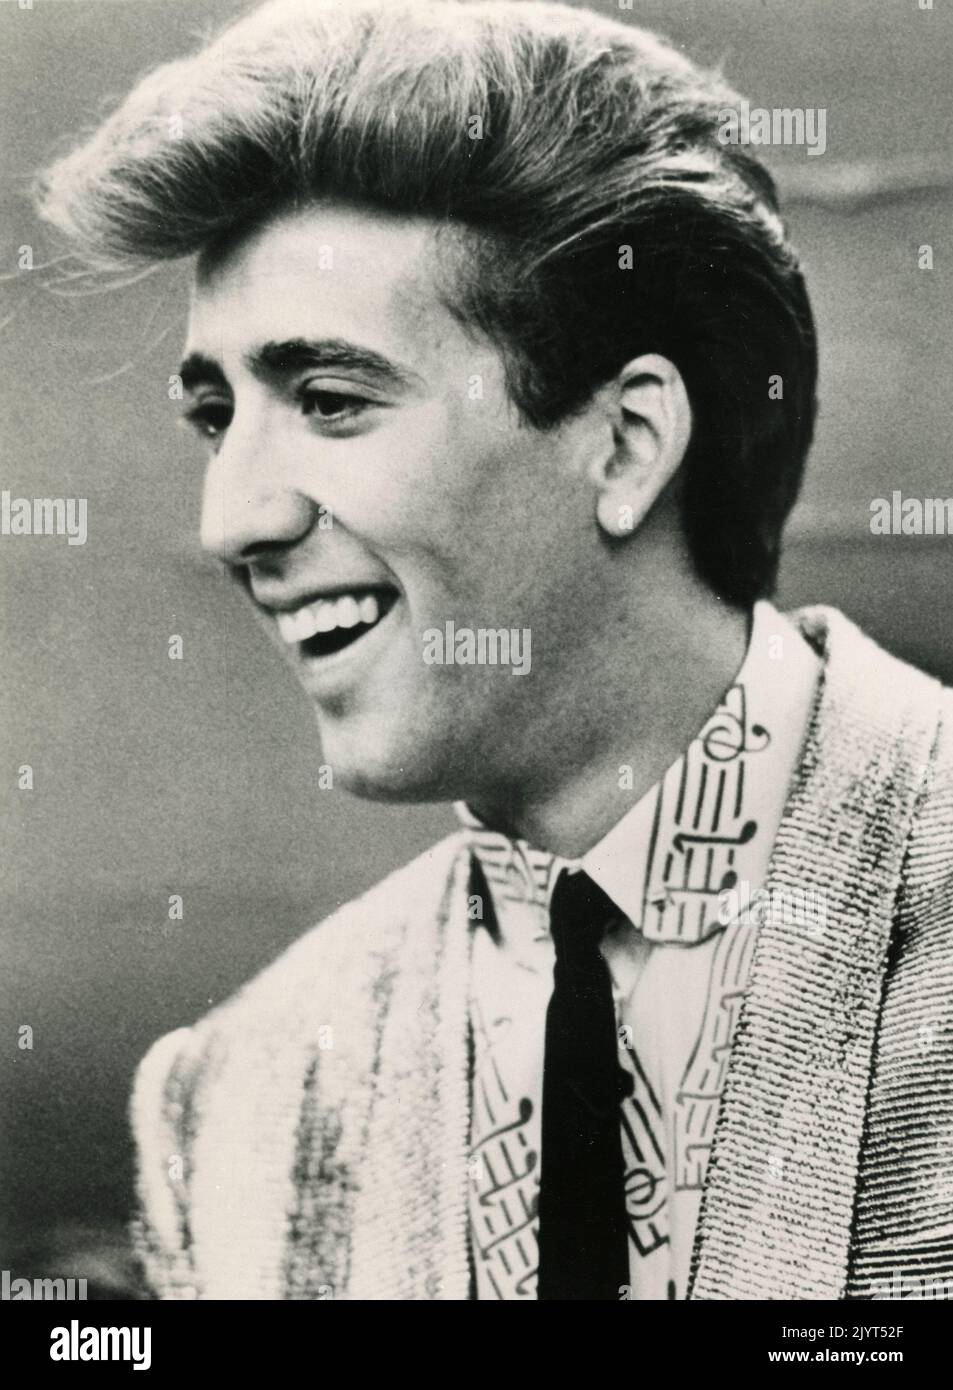 American actor Nicholas Cage in the movie Peggy Sue Got Married, USA 1986 Stock Photo